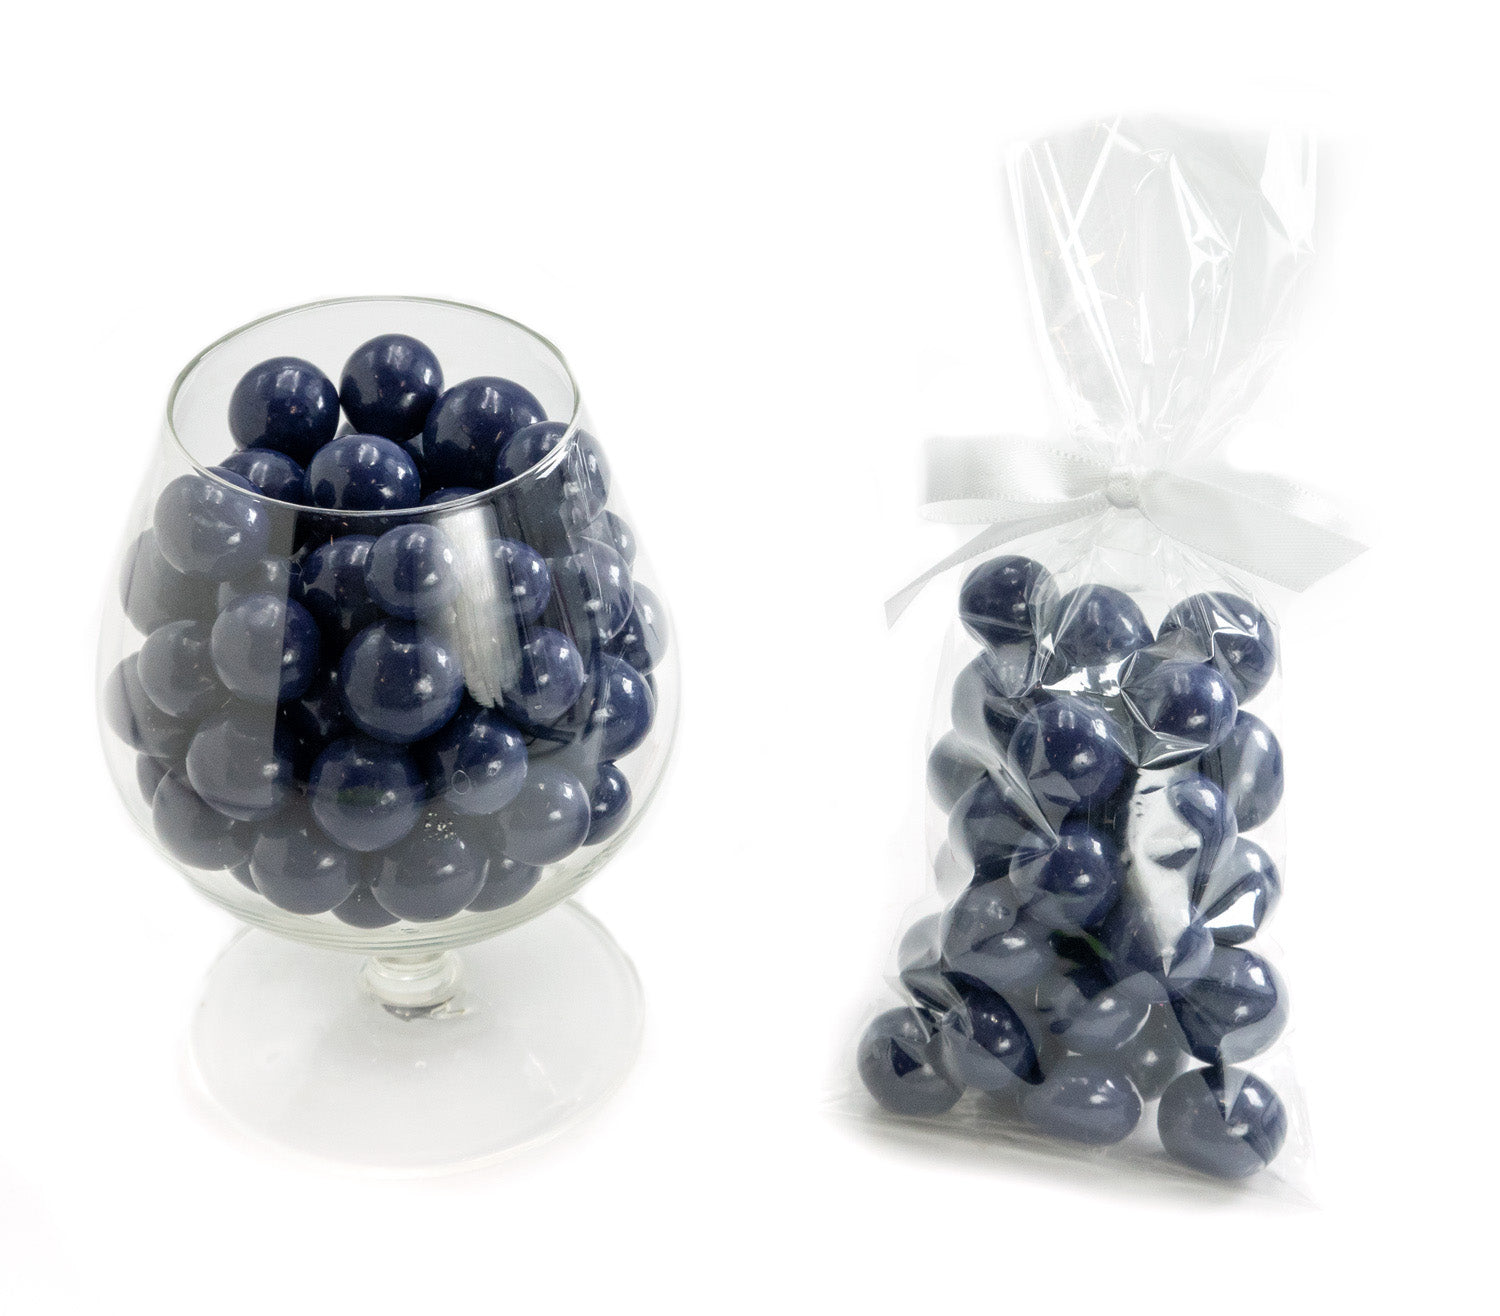 Chocolate-covered dried blueberries